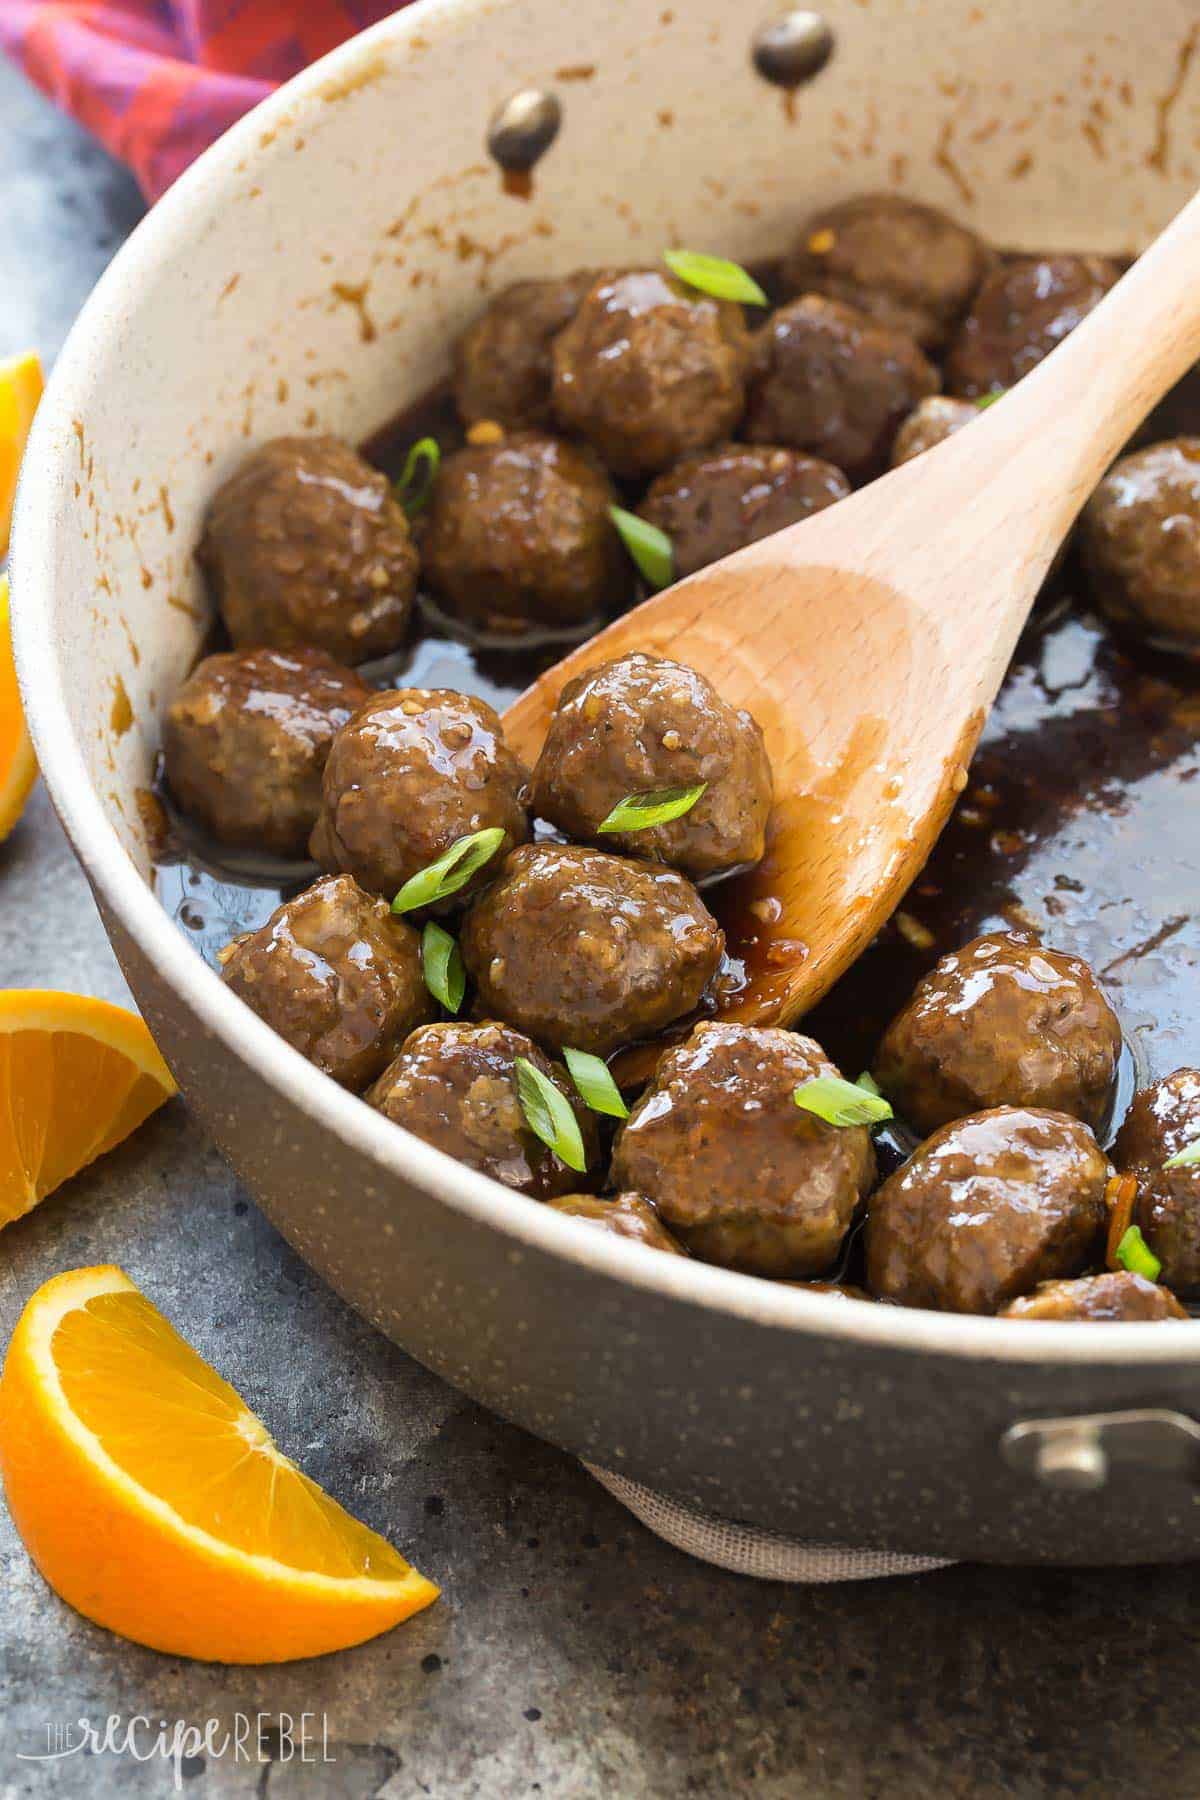 meatballs in large grey skillet with orange sauce and wooden spoon scooping meatballs